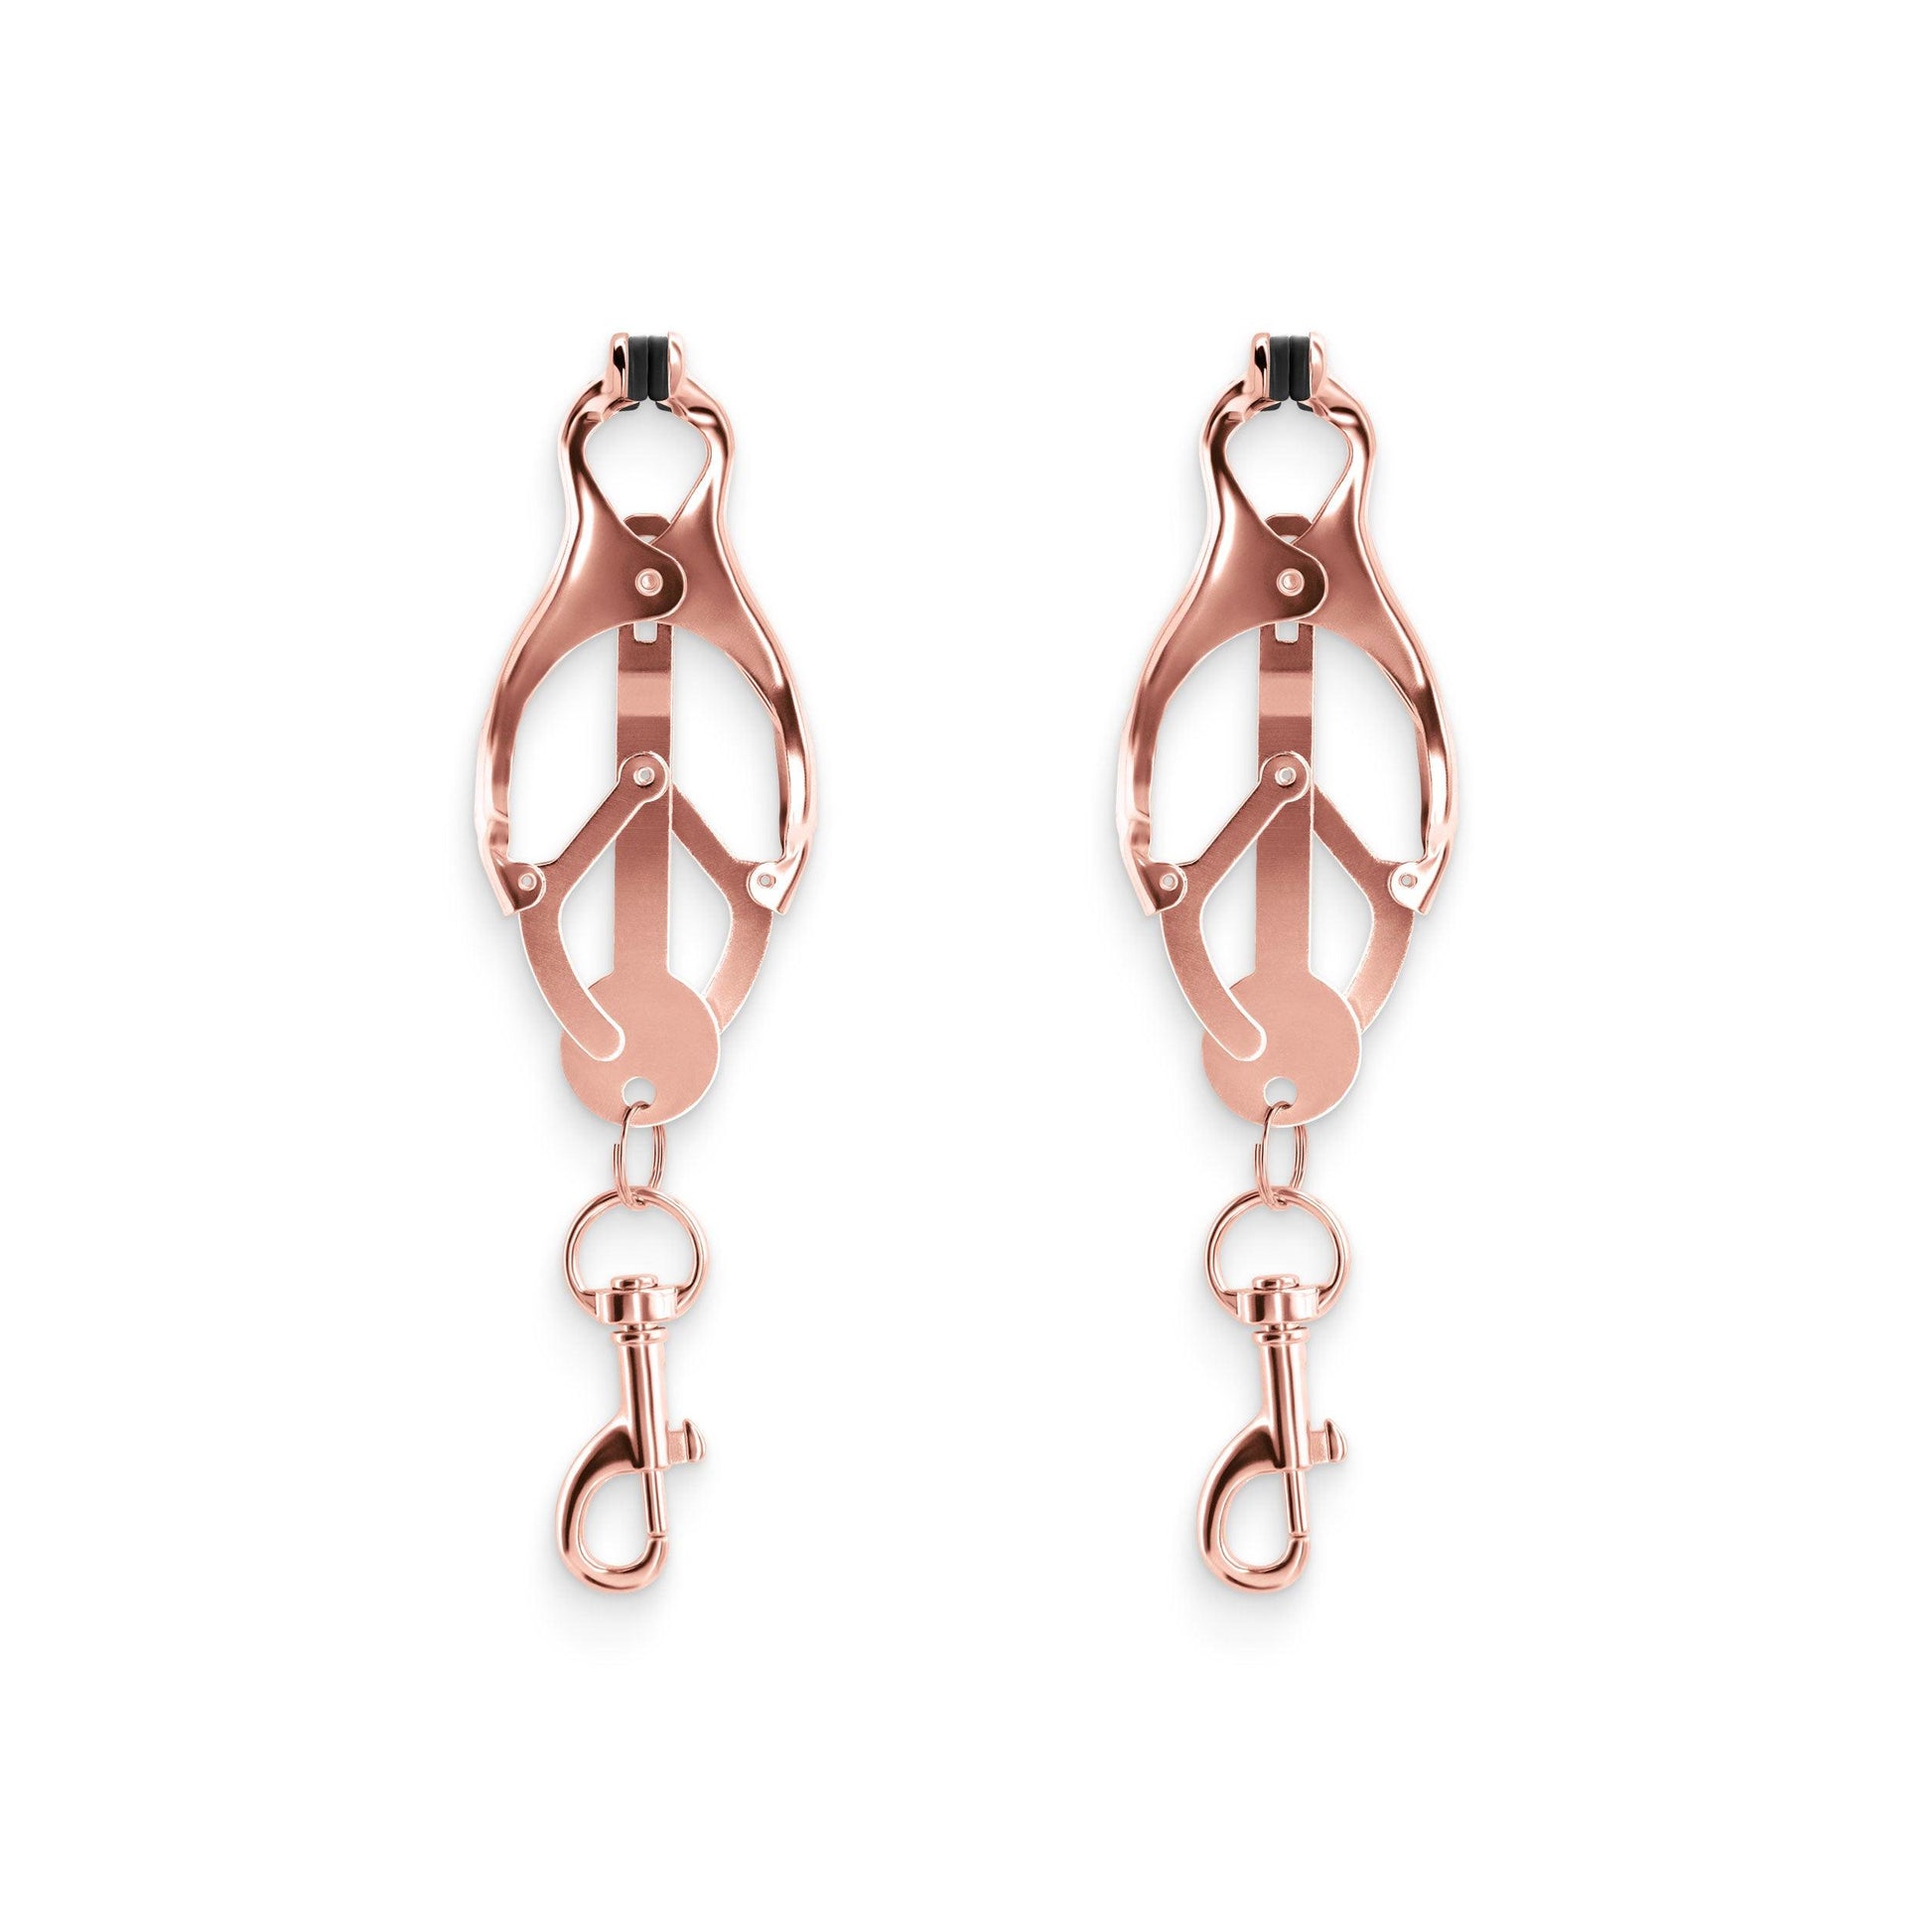 Bound - Nipple Clamps - C3 - Rose Gold - My Sex Toy Hub